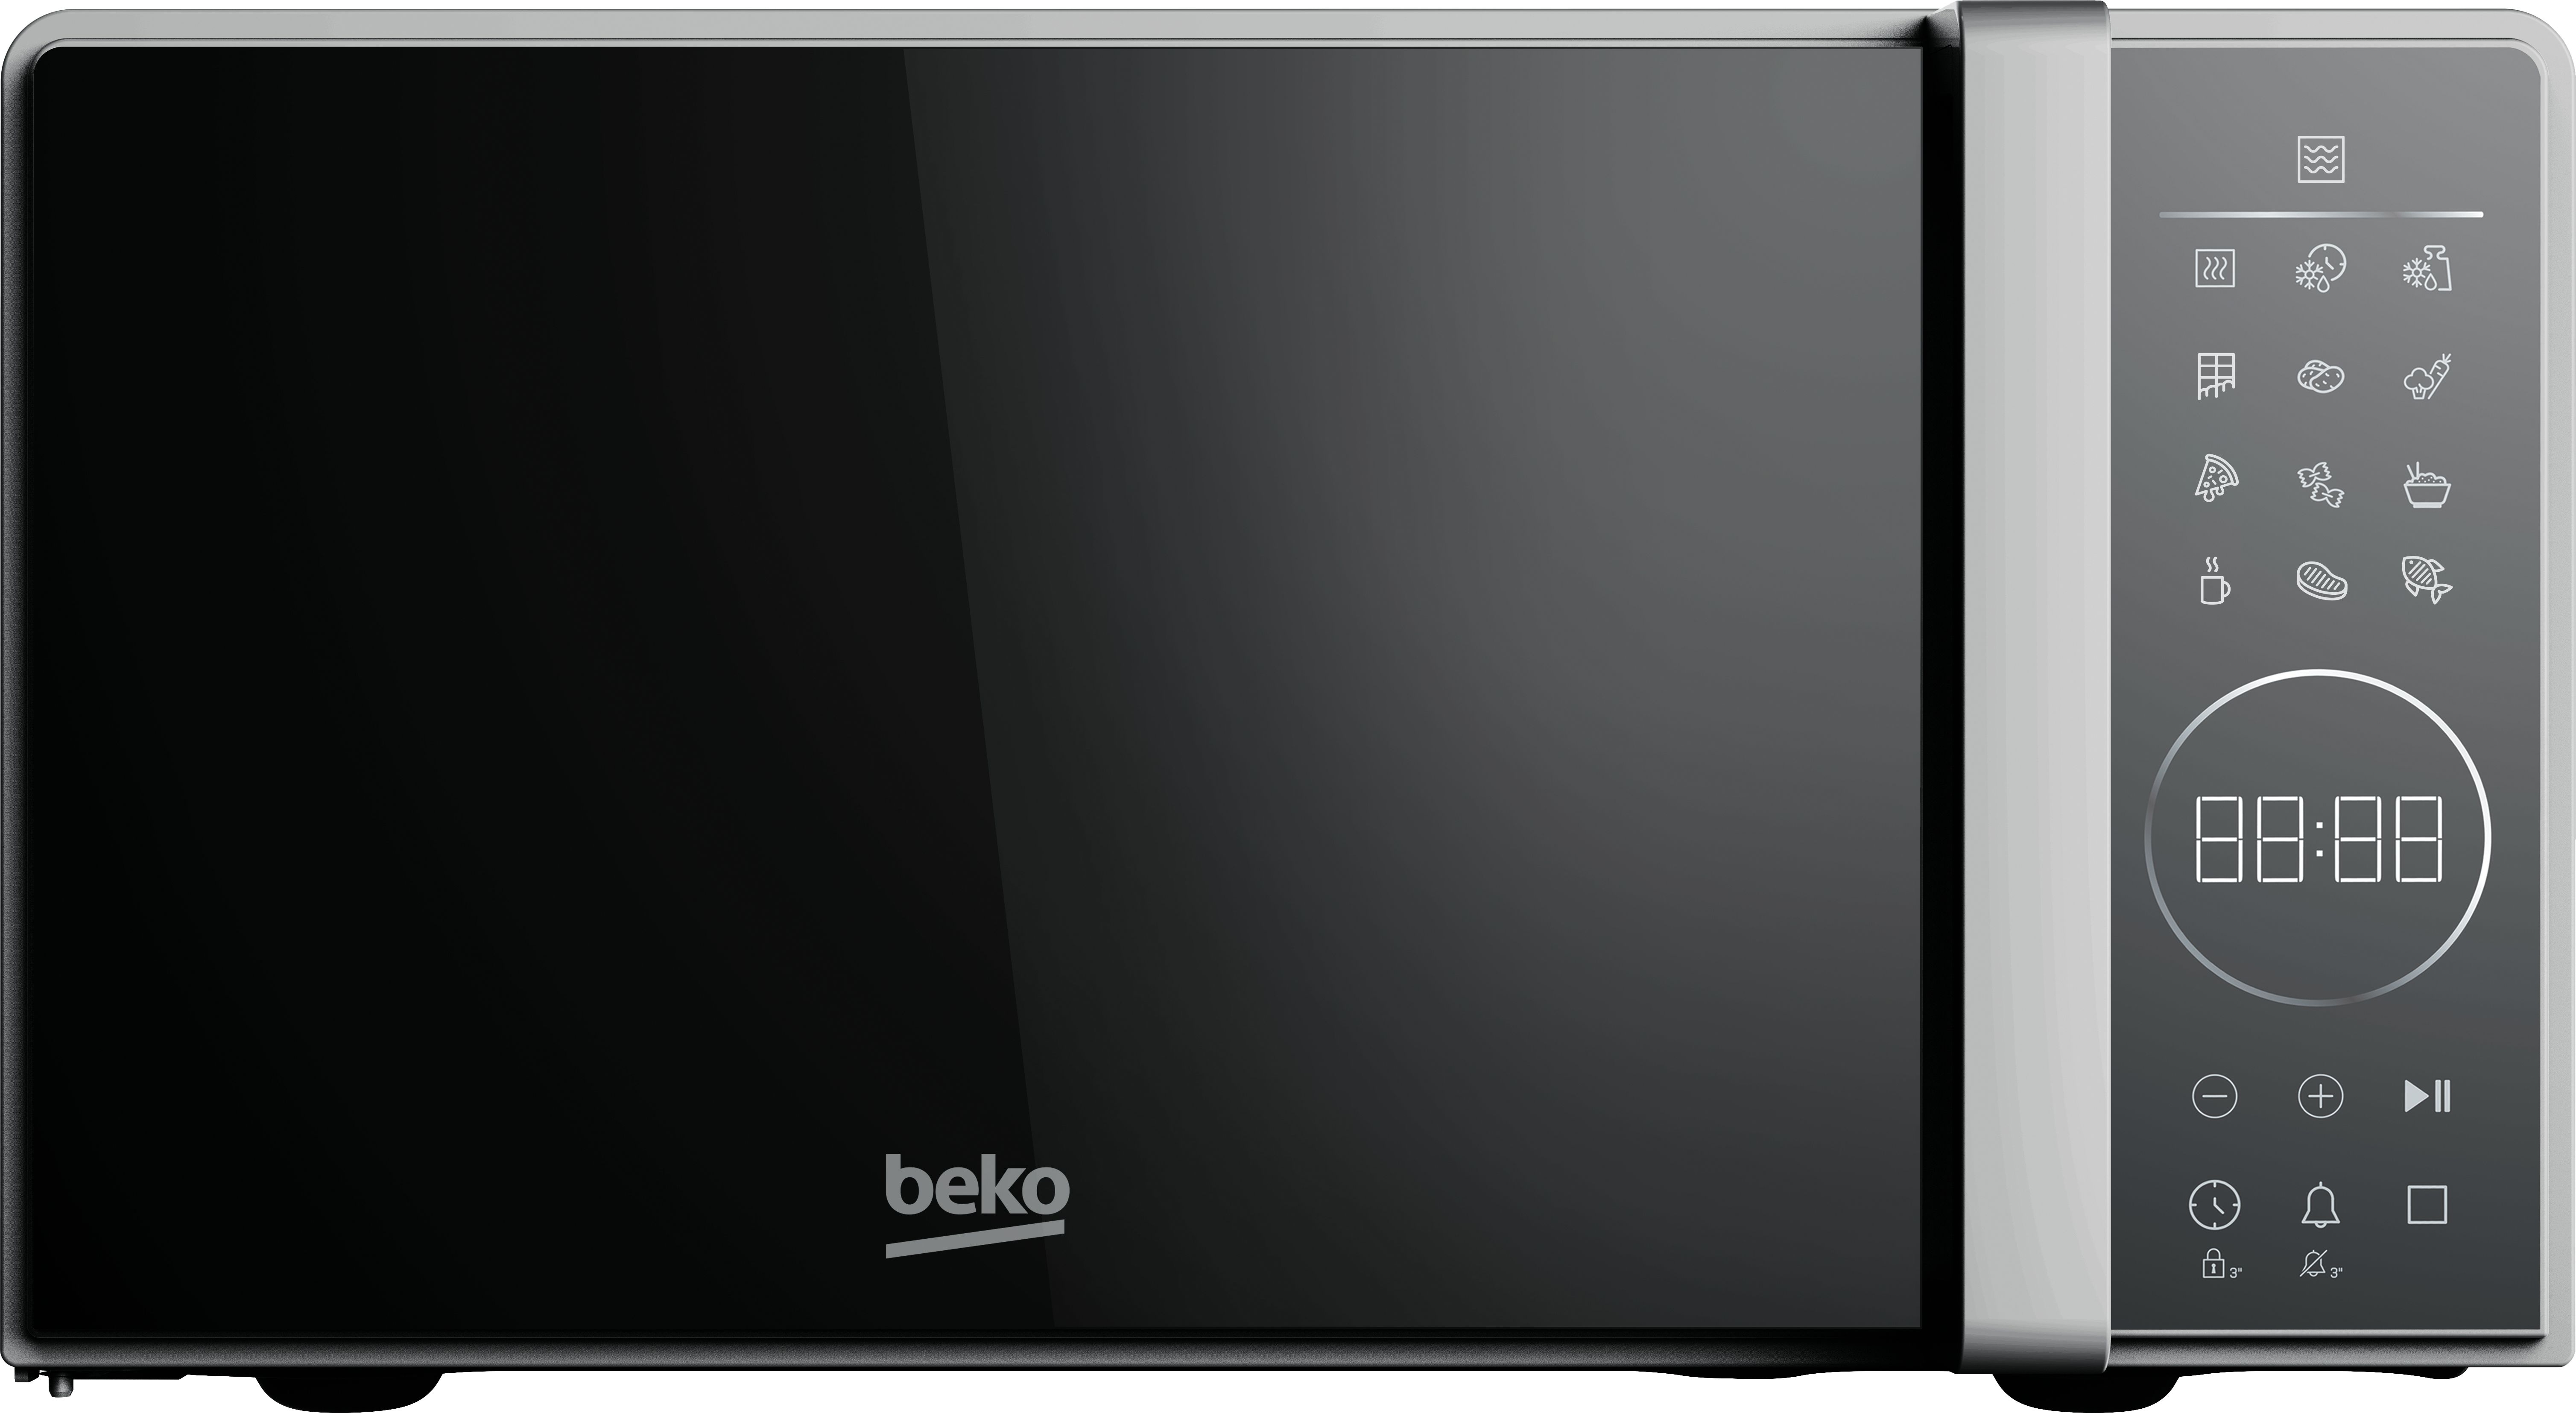 Beko MOC20130SFB 24cm tall, 45cm wide, Freestanding Compact Microwave - Silver, Silver